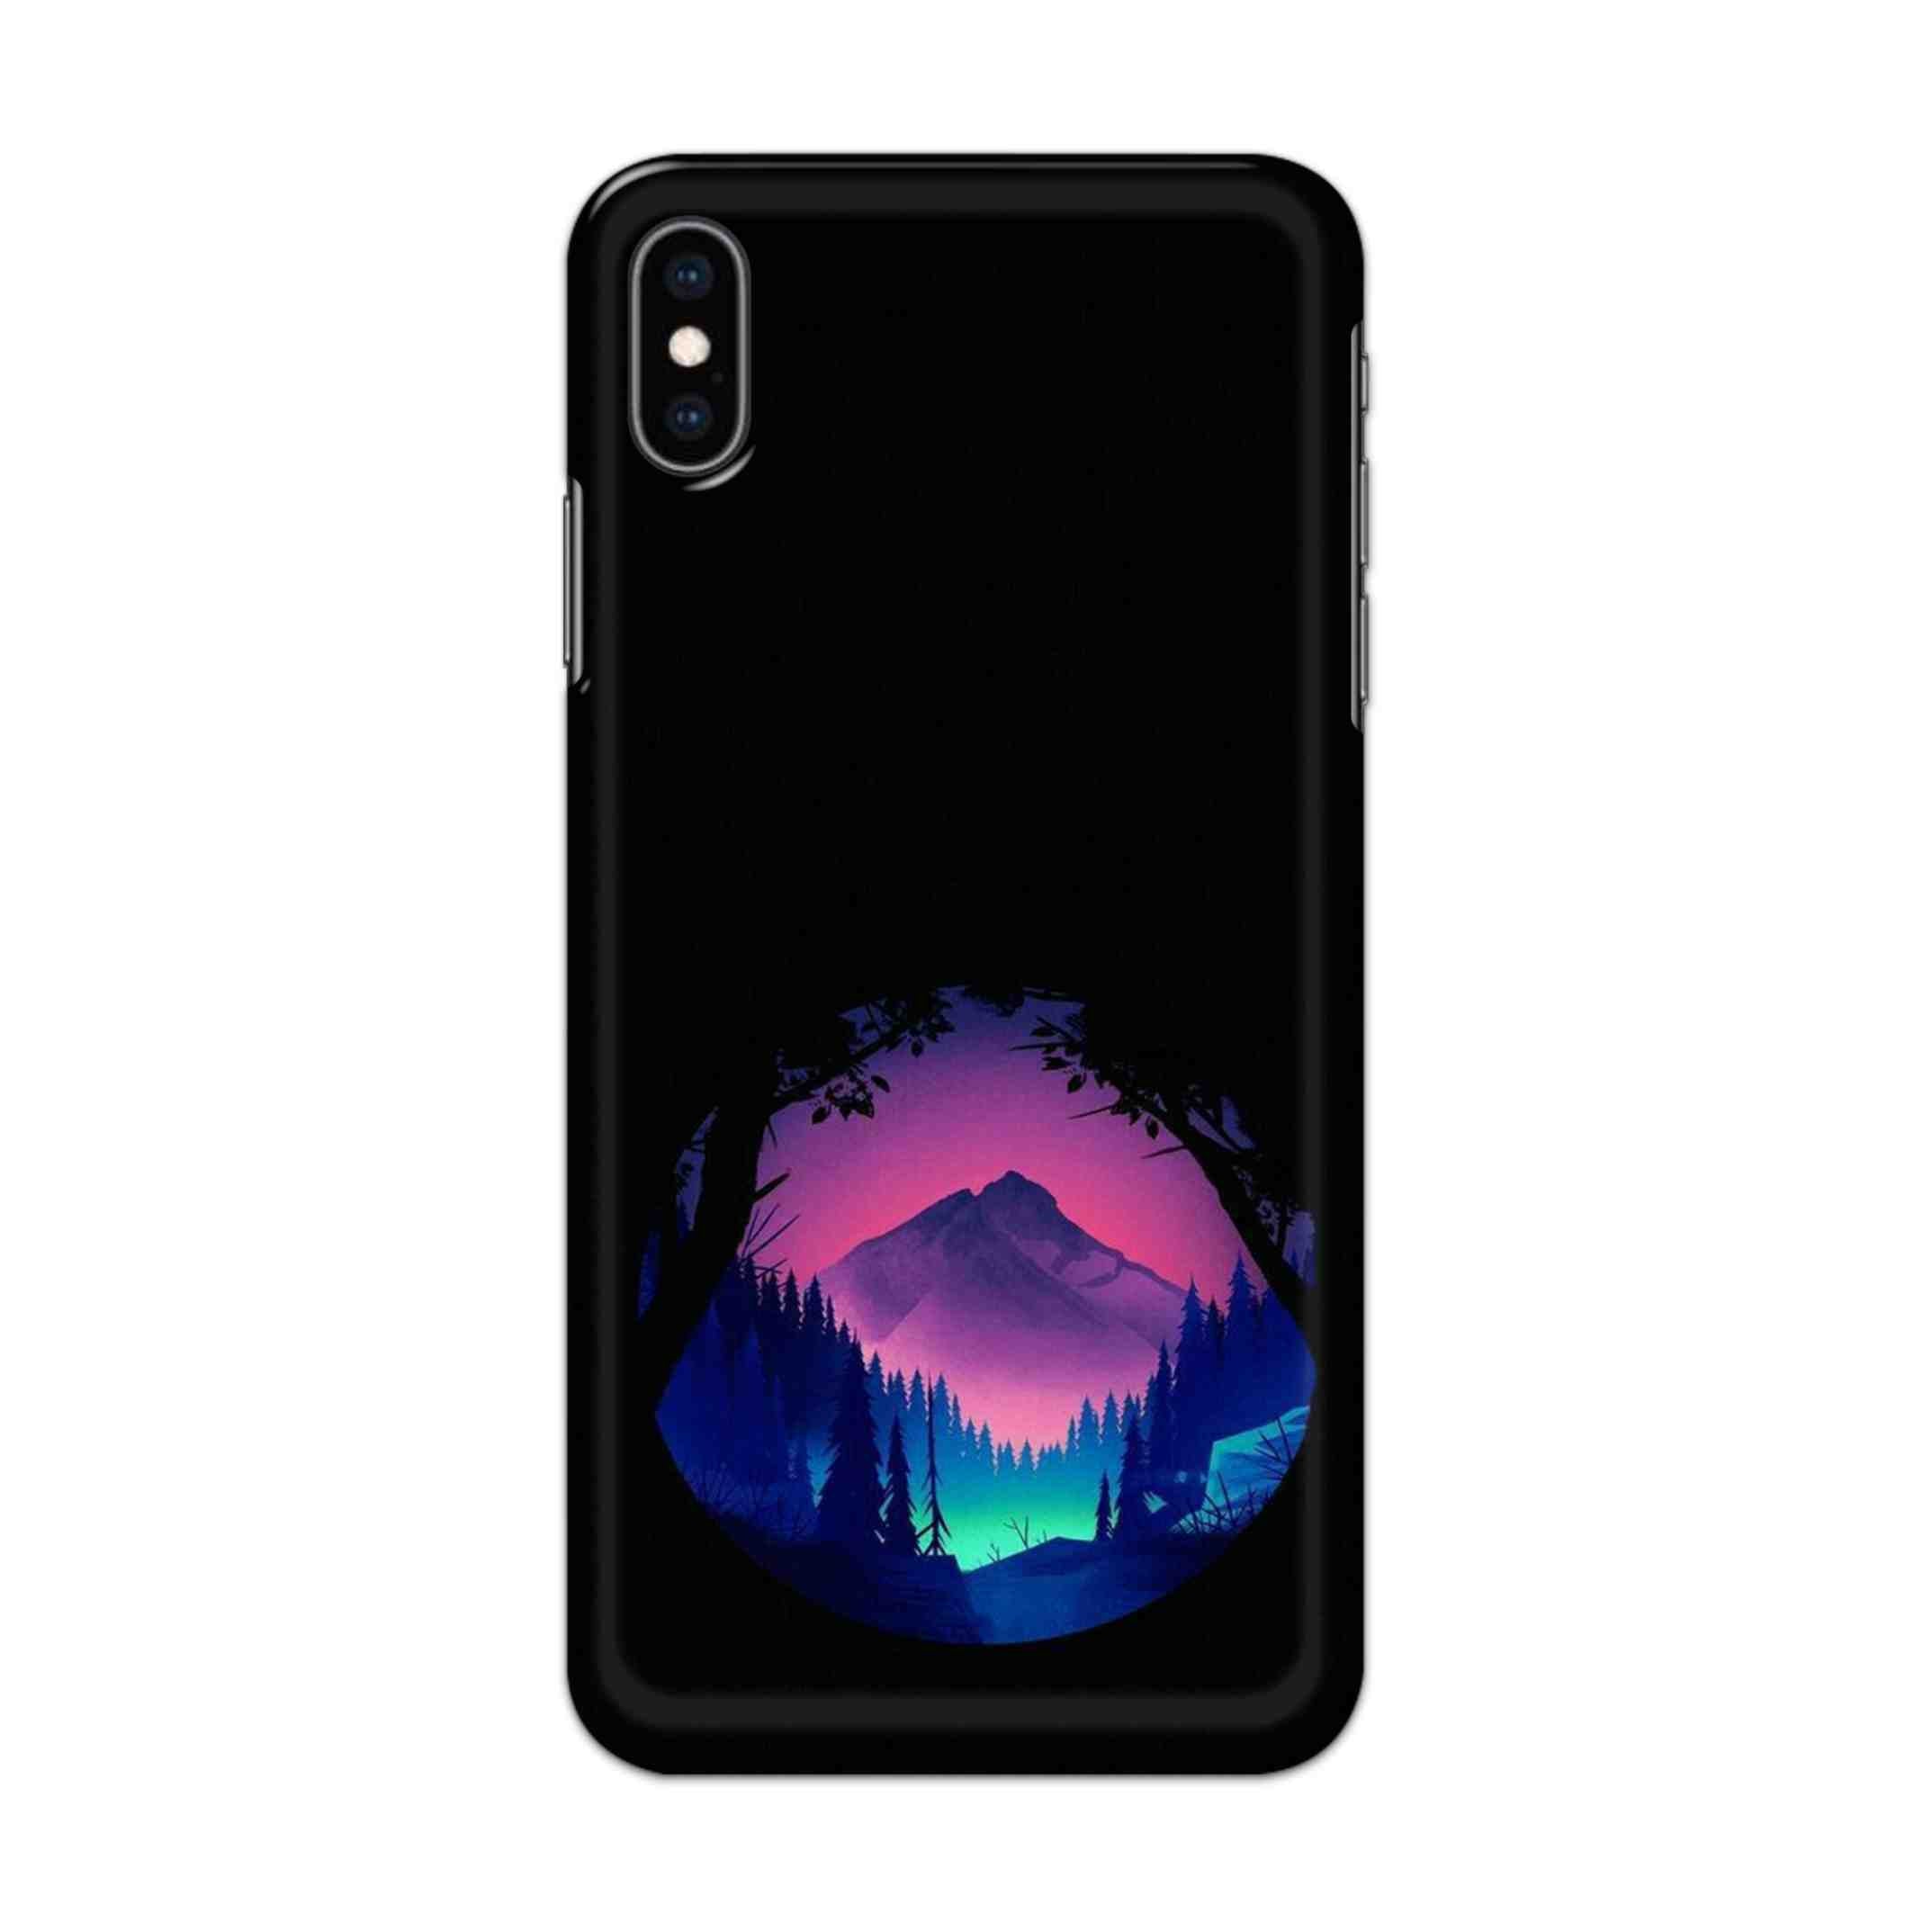 Buy Neon Teables Hard Back Mobile Phone Case/Cover For iPhone XS MAX Online